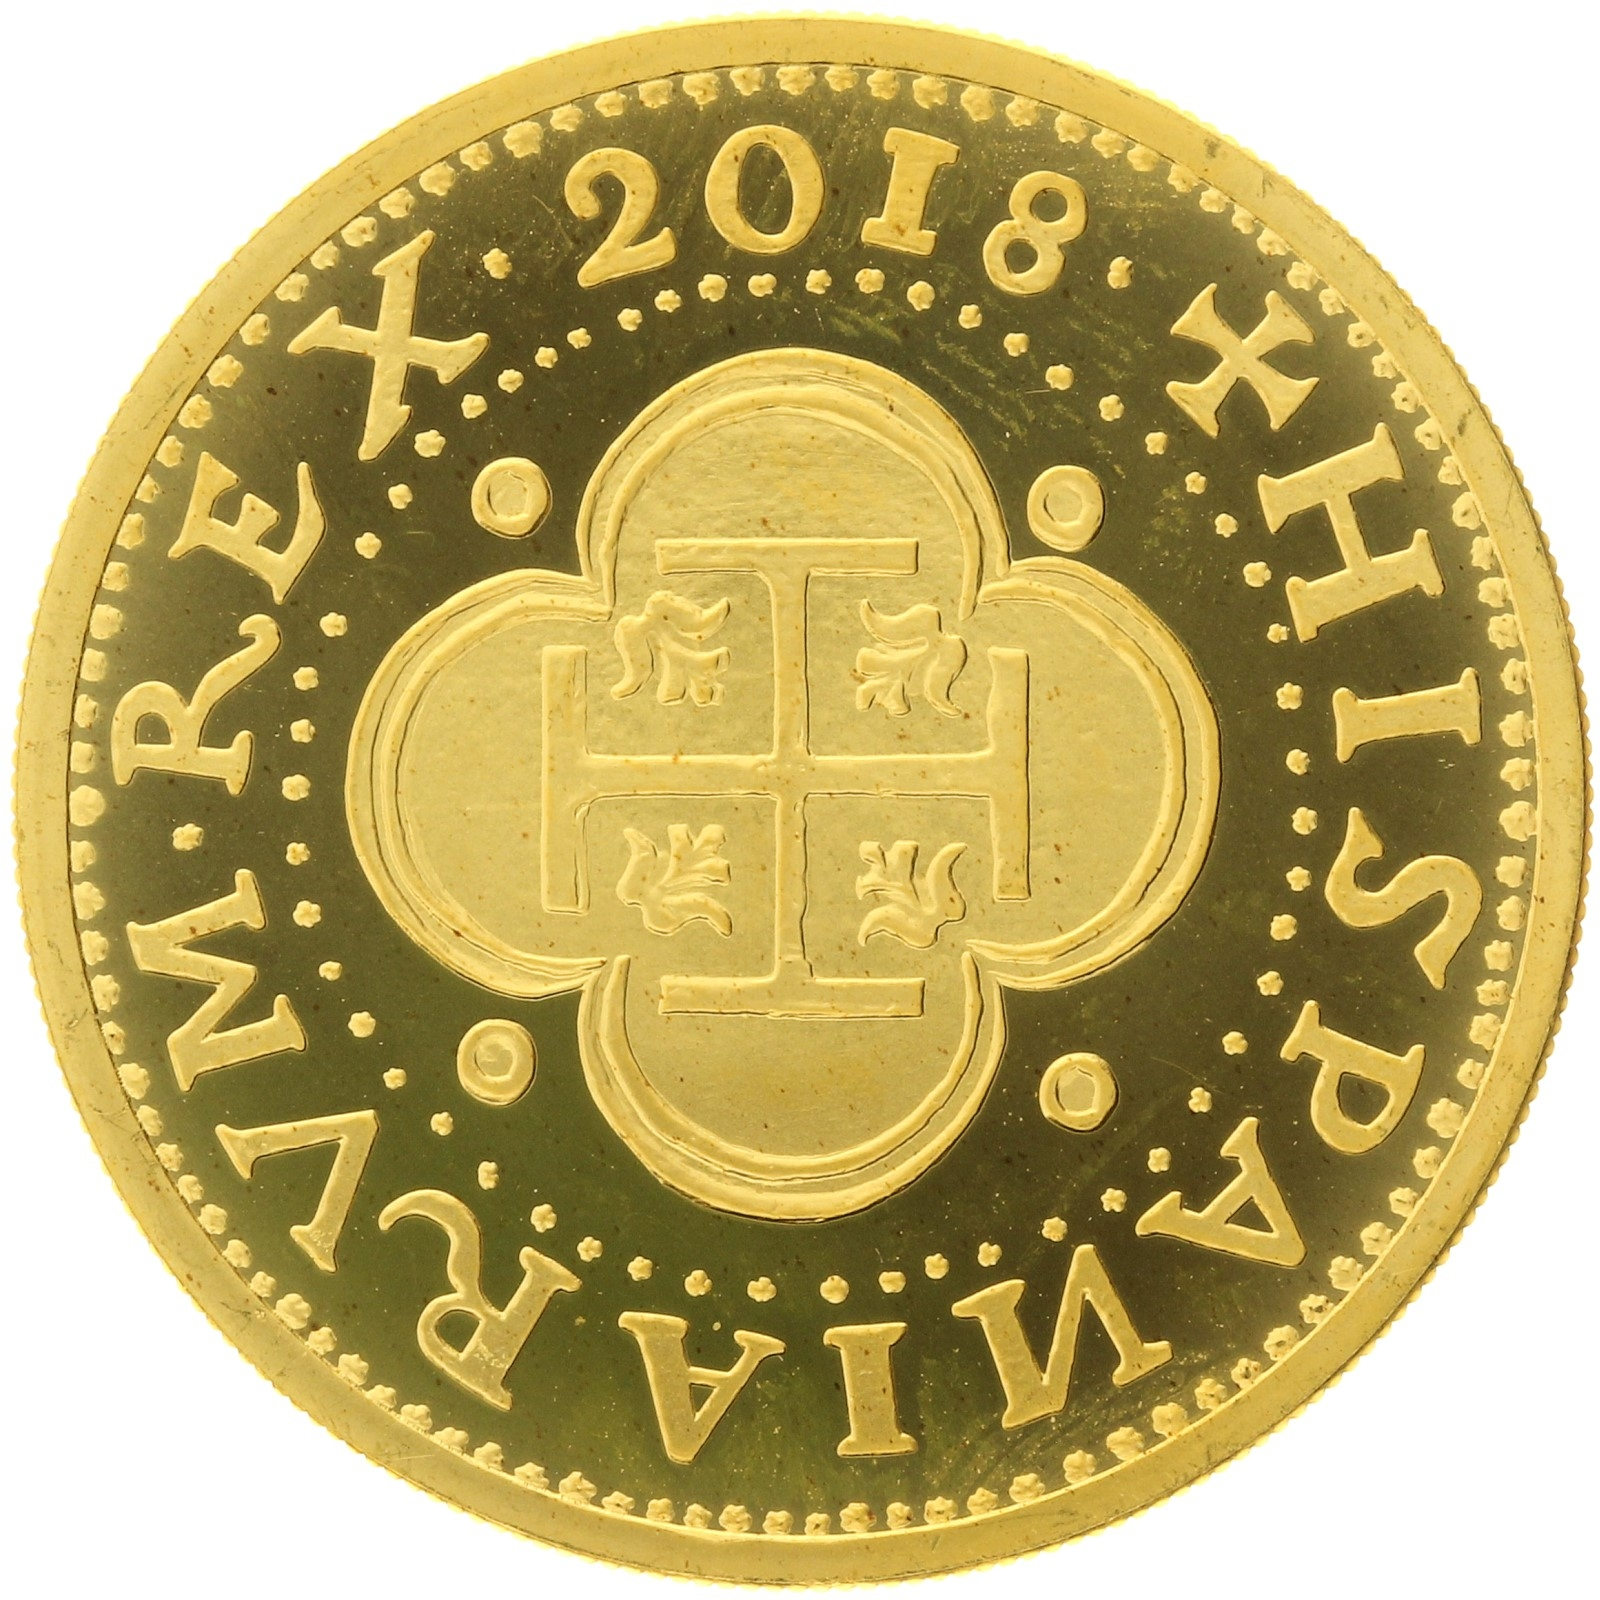 Spain - 200 euro - 2018 - 150 years of the escudos